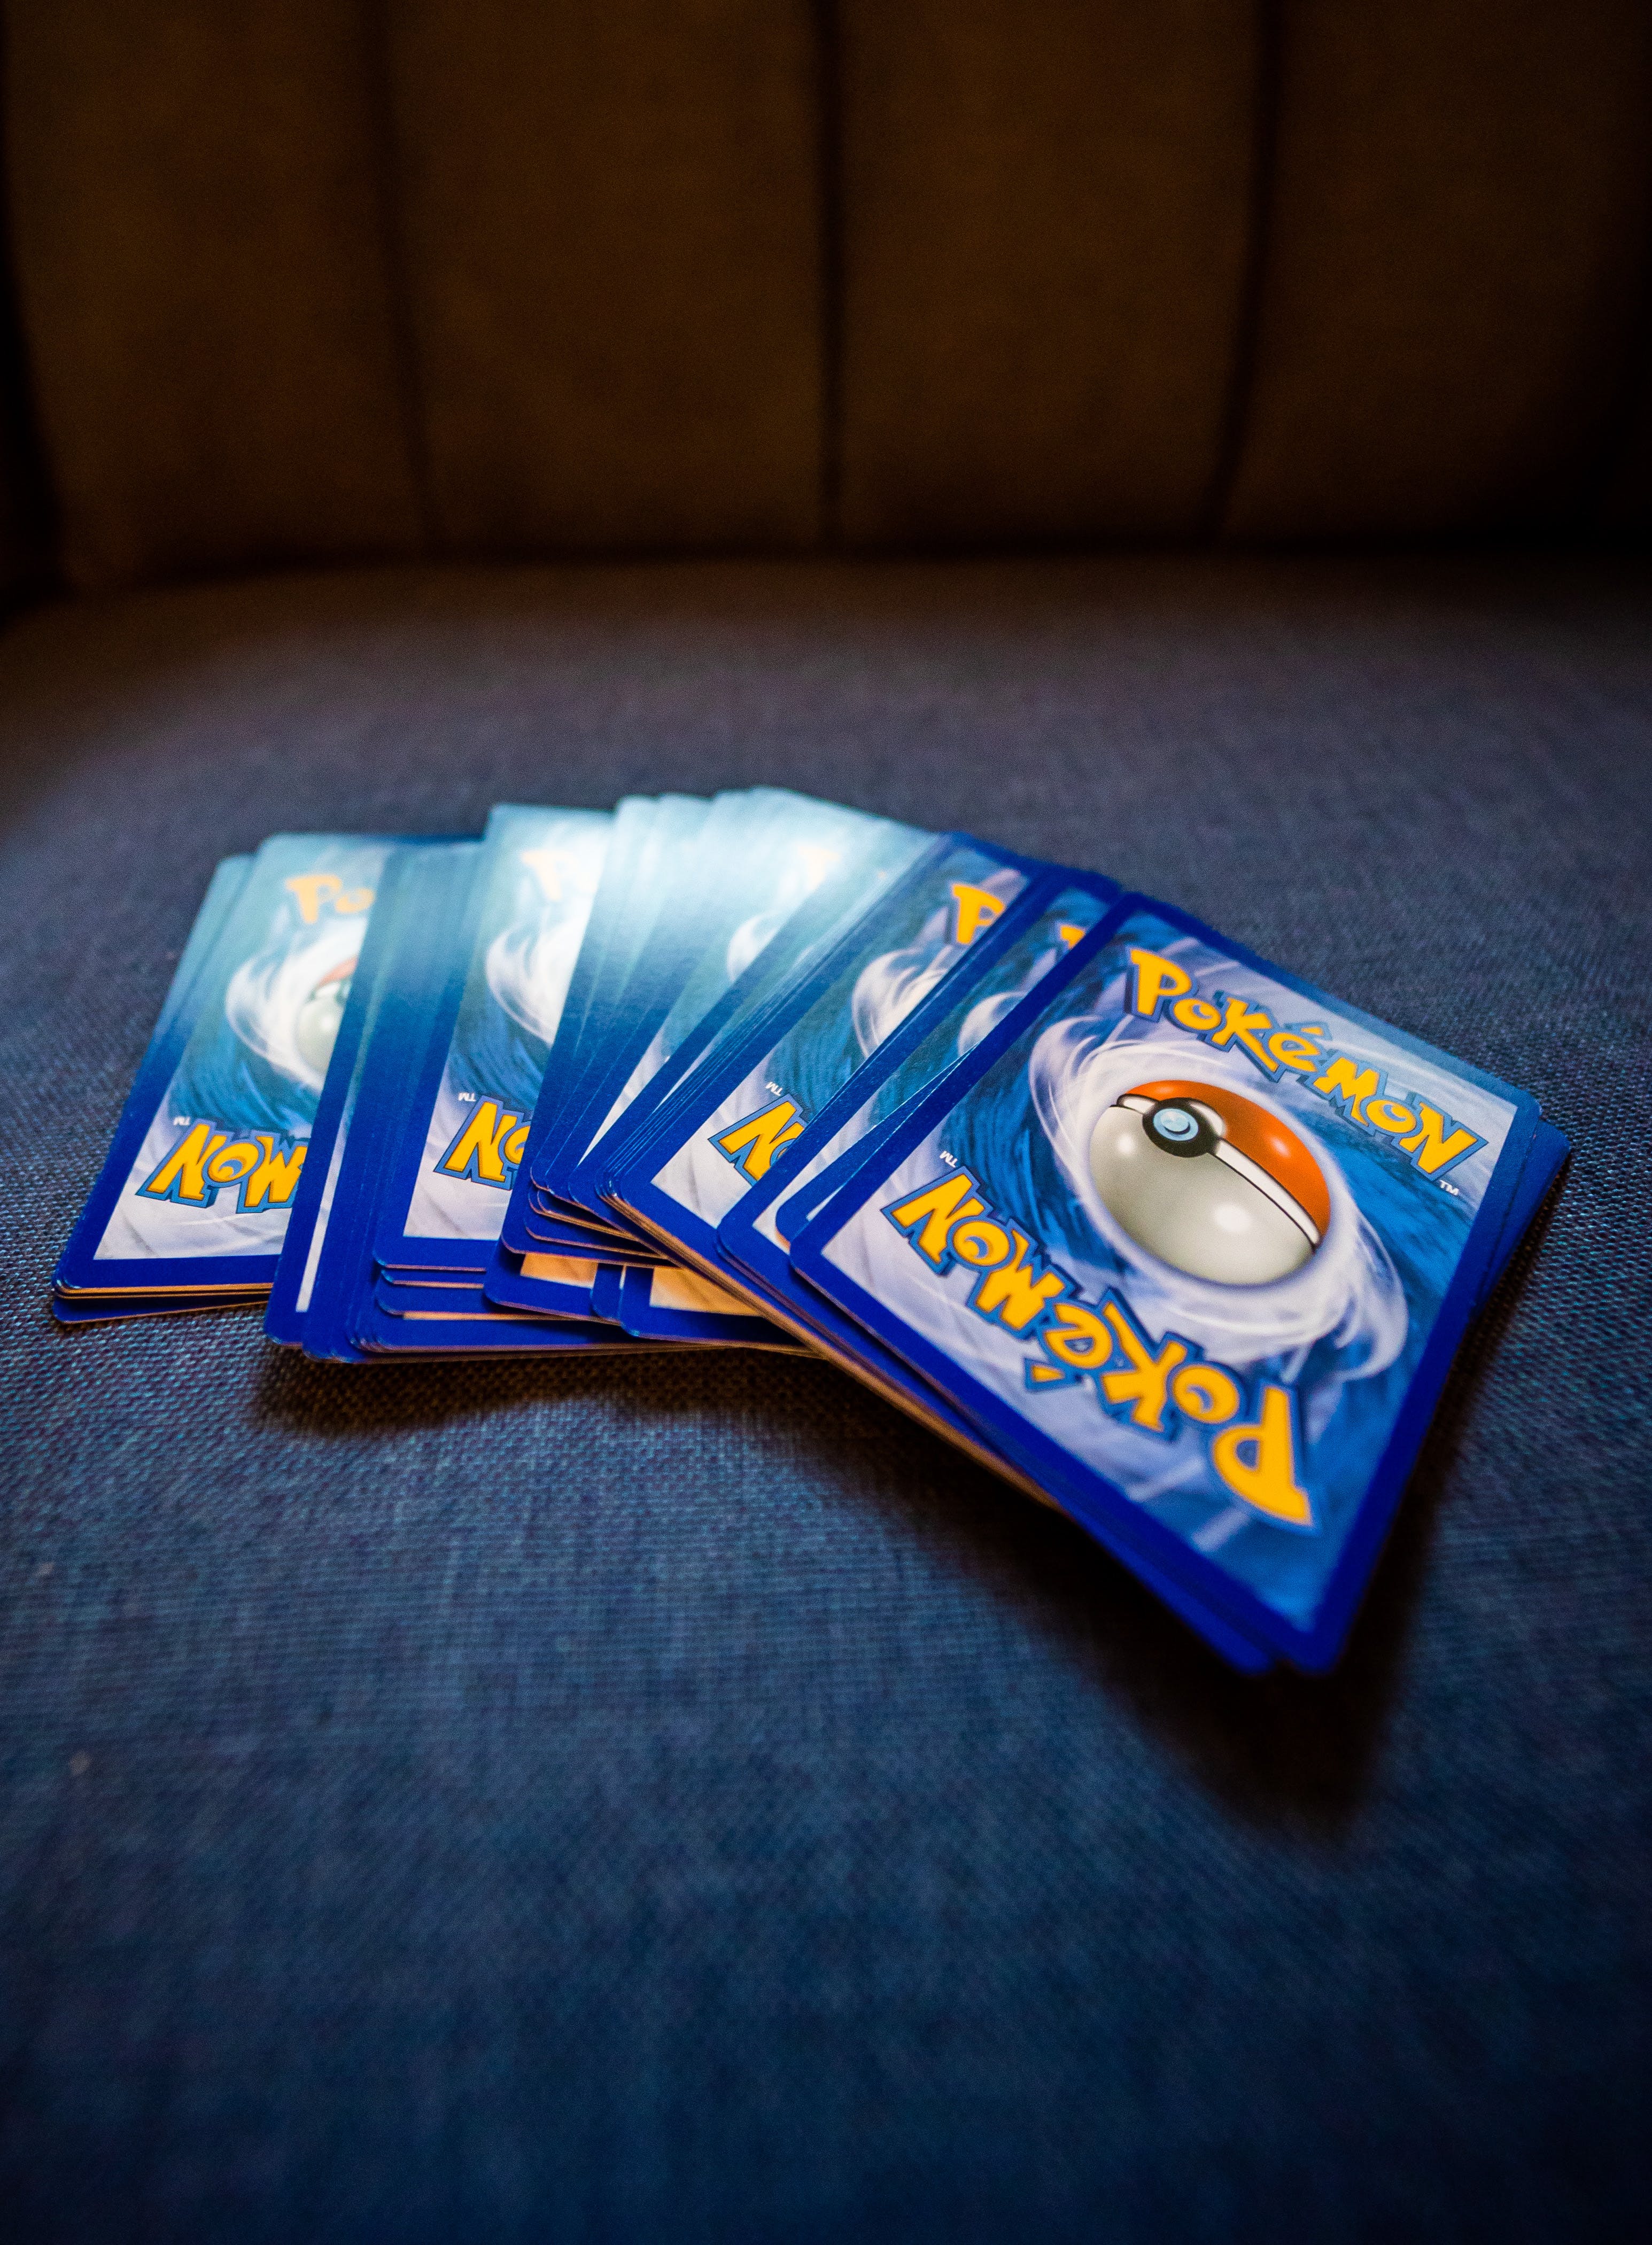 A stack of Pokémon cards. | Source: Pexels